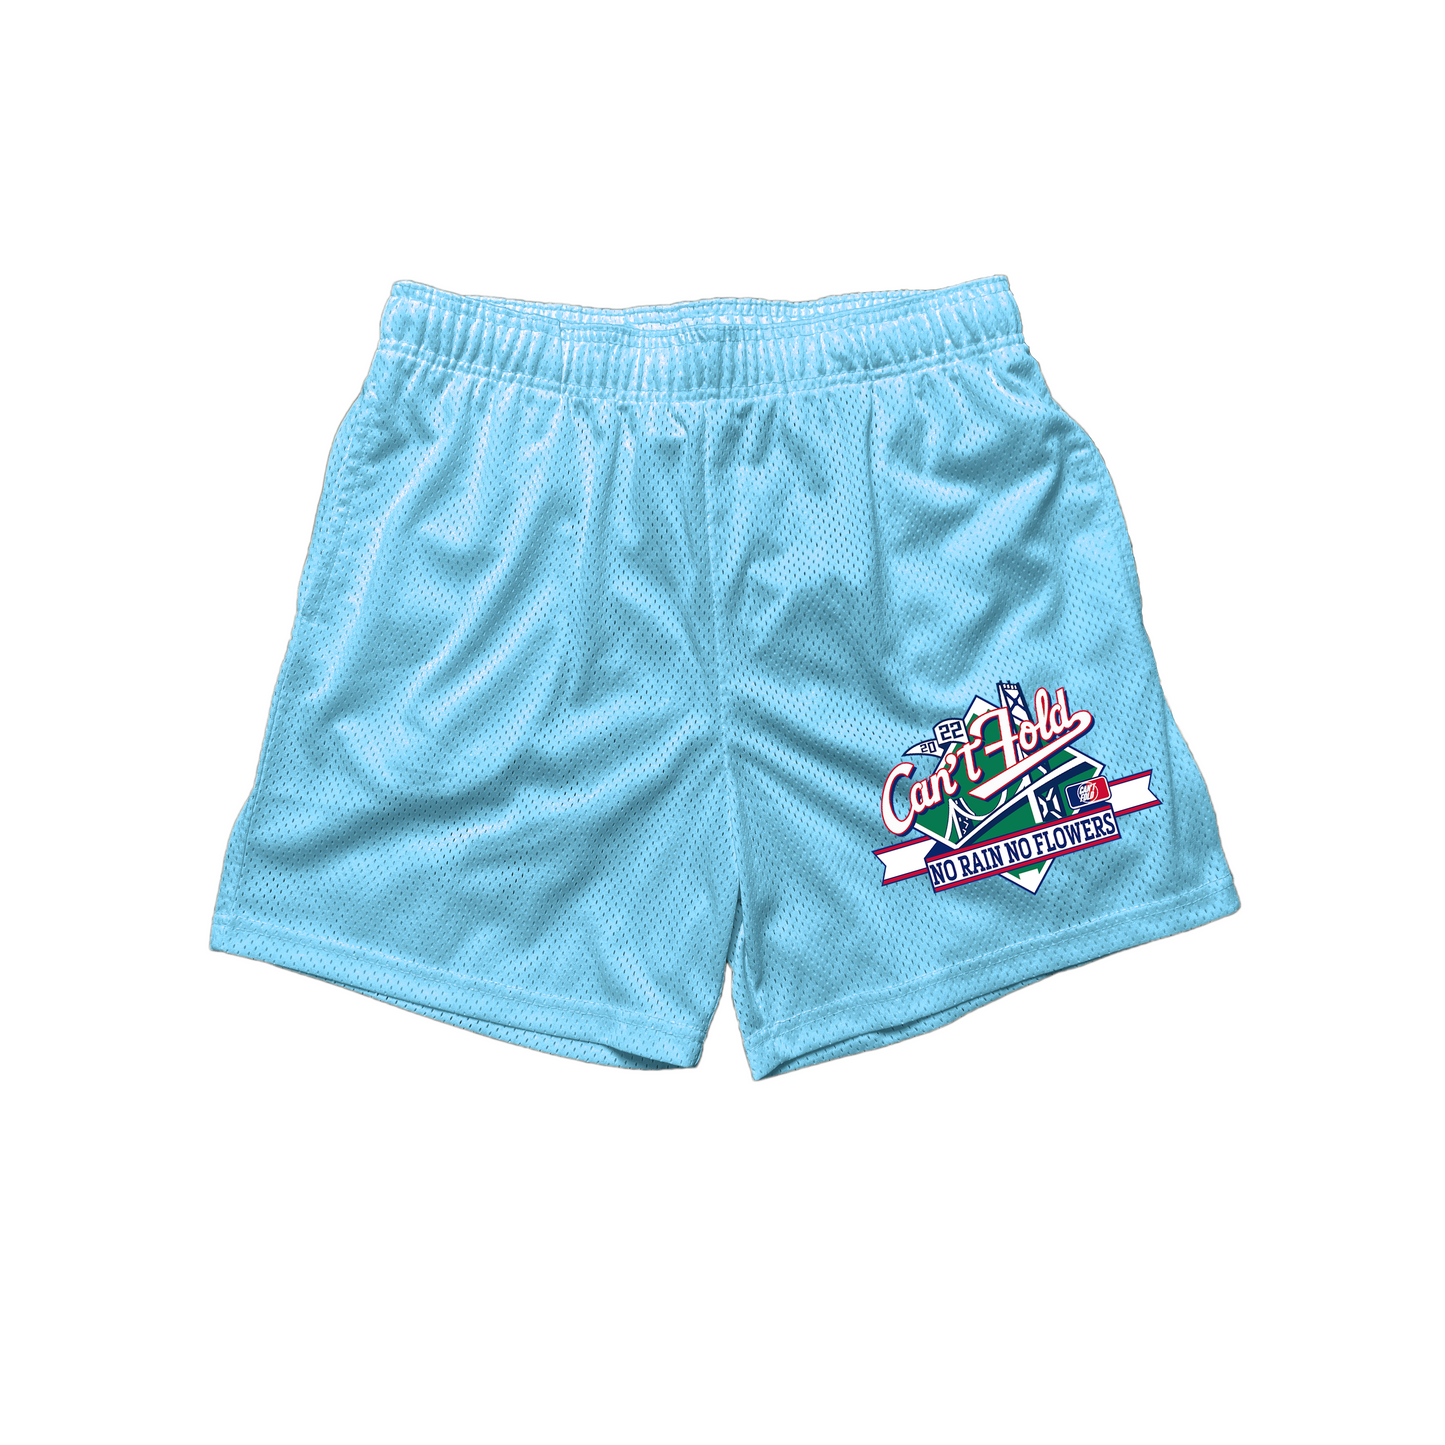 "Classic Can't Fold Mesh Shorts" (BABY BLUE)